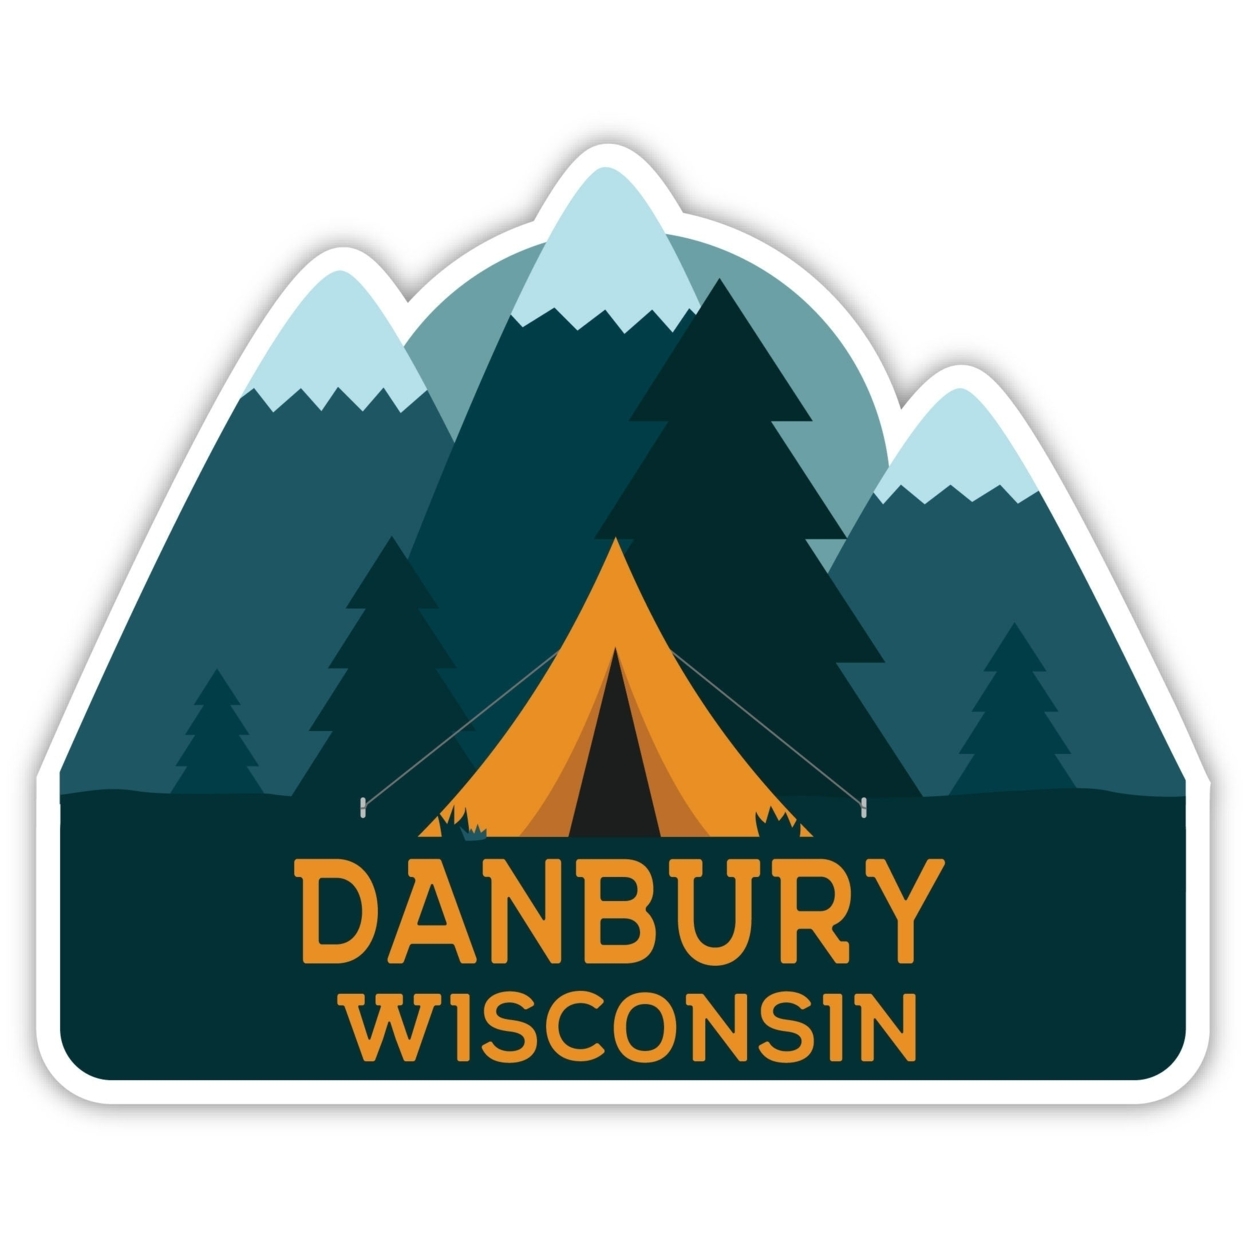 Danbury Wisconsin Souvenir Decorative Stickers (Choose Theme And Size) - 4-Pack, 10-Inch, Tent